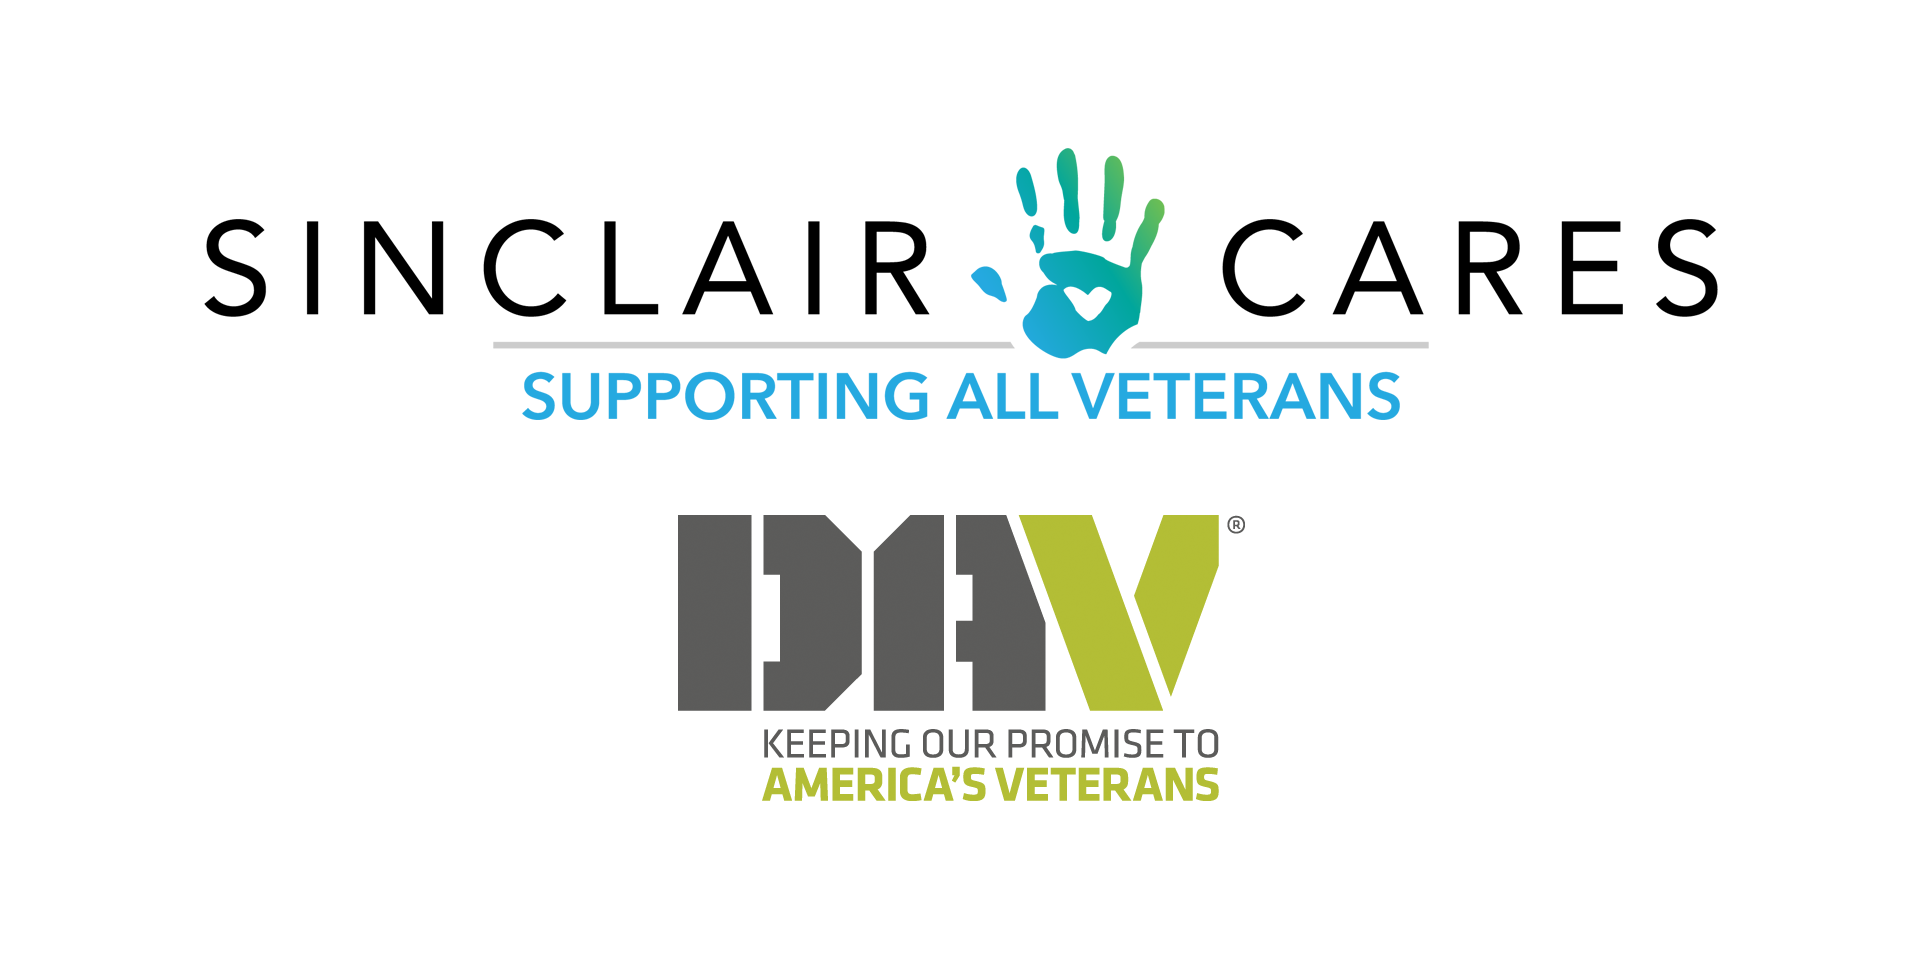 Supporting All Veterans